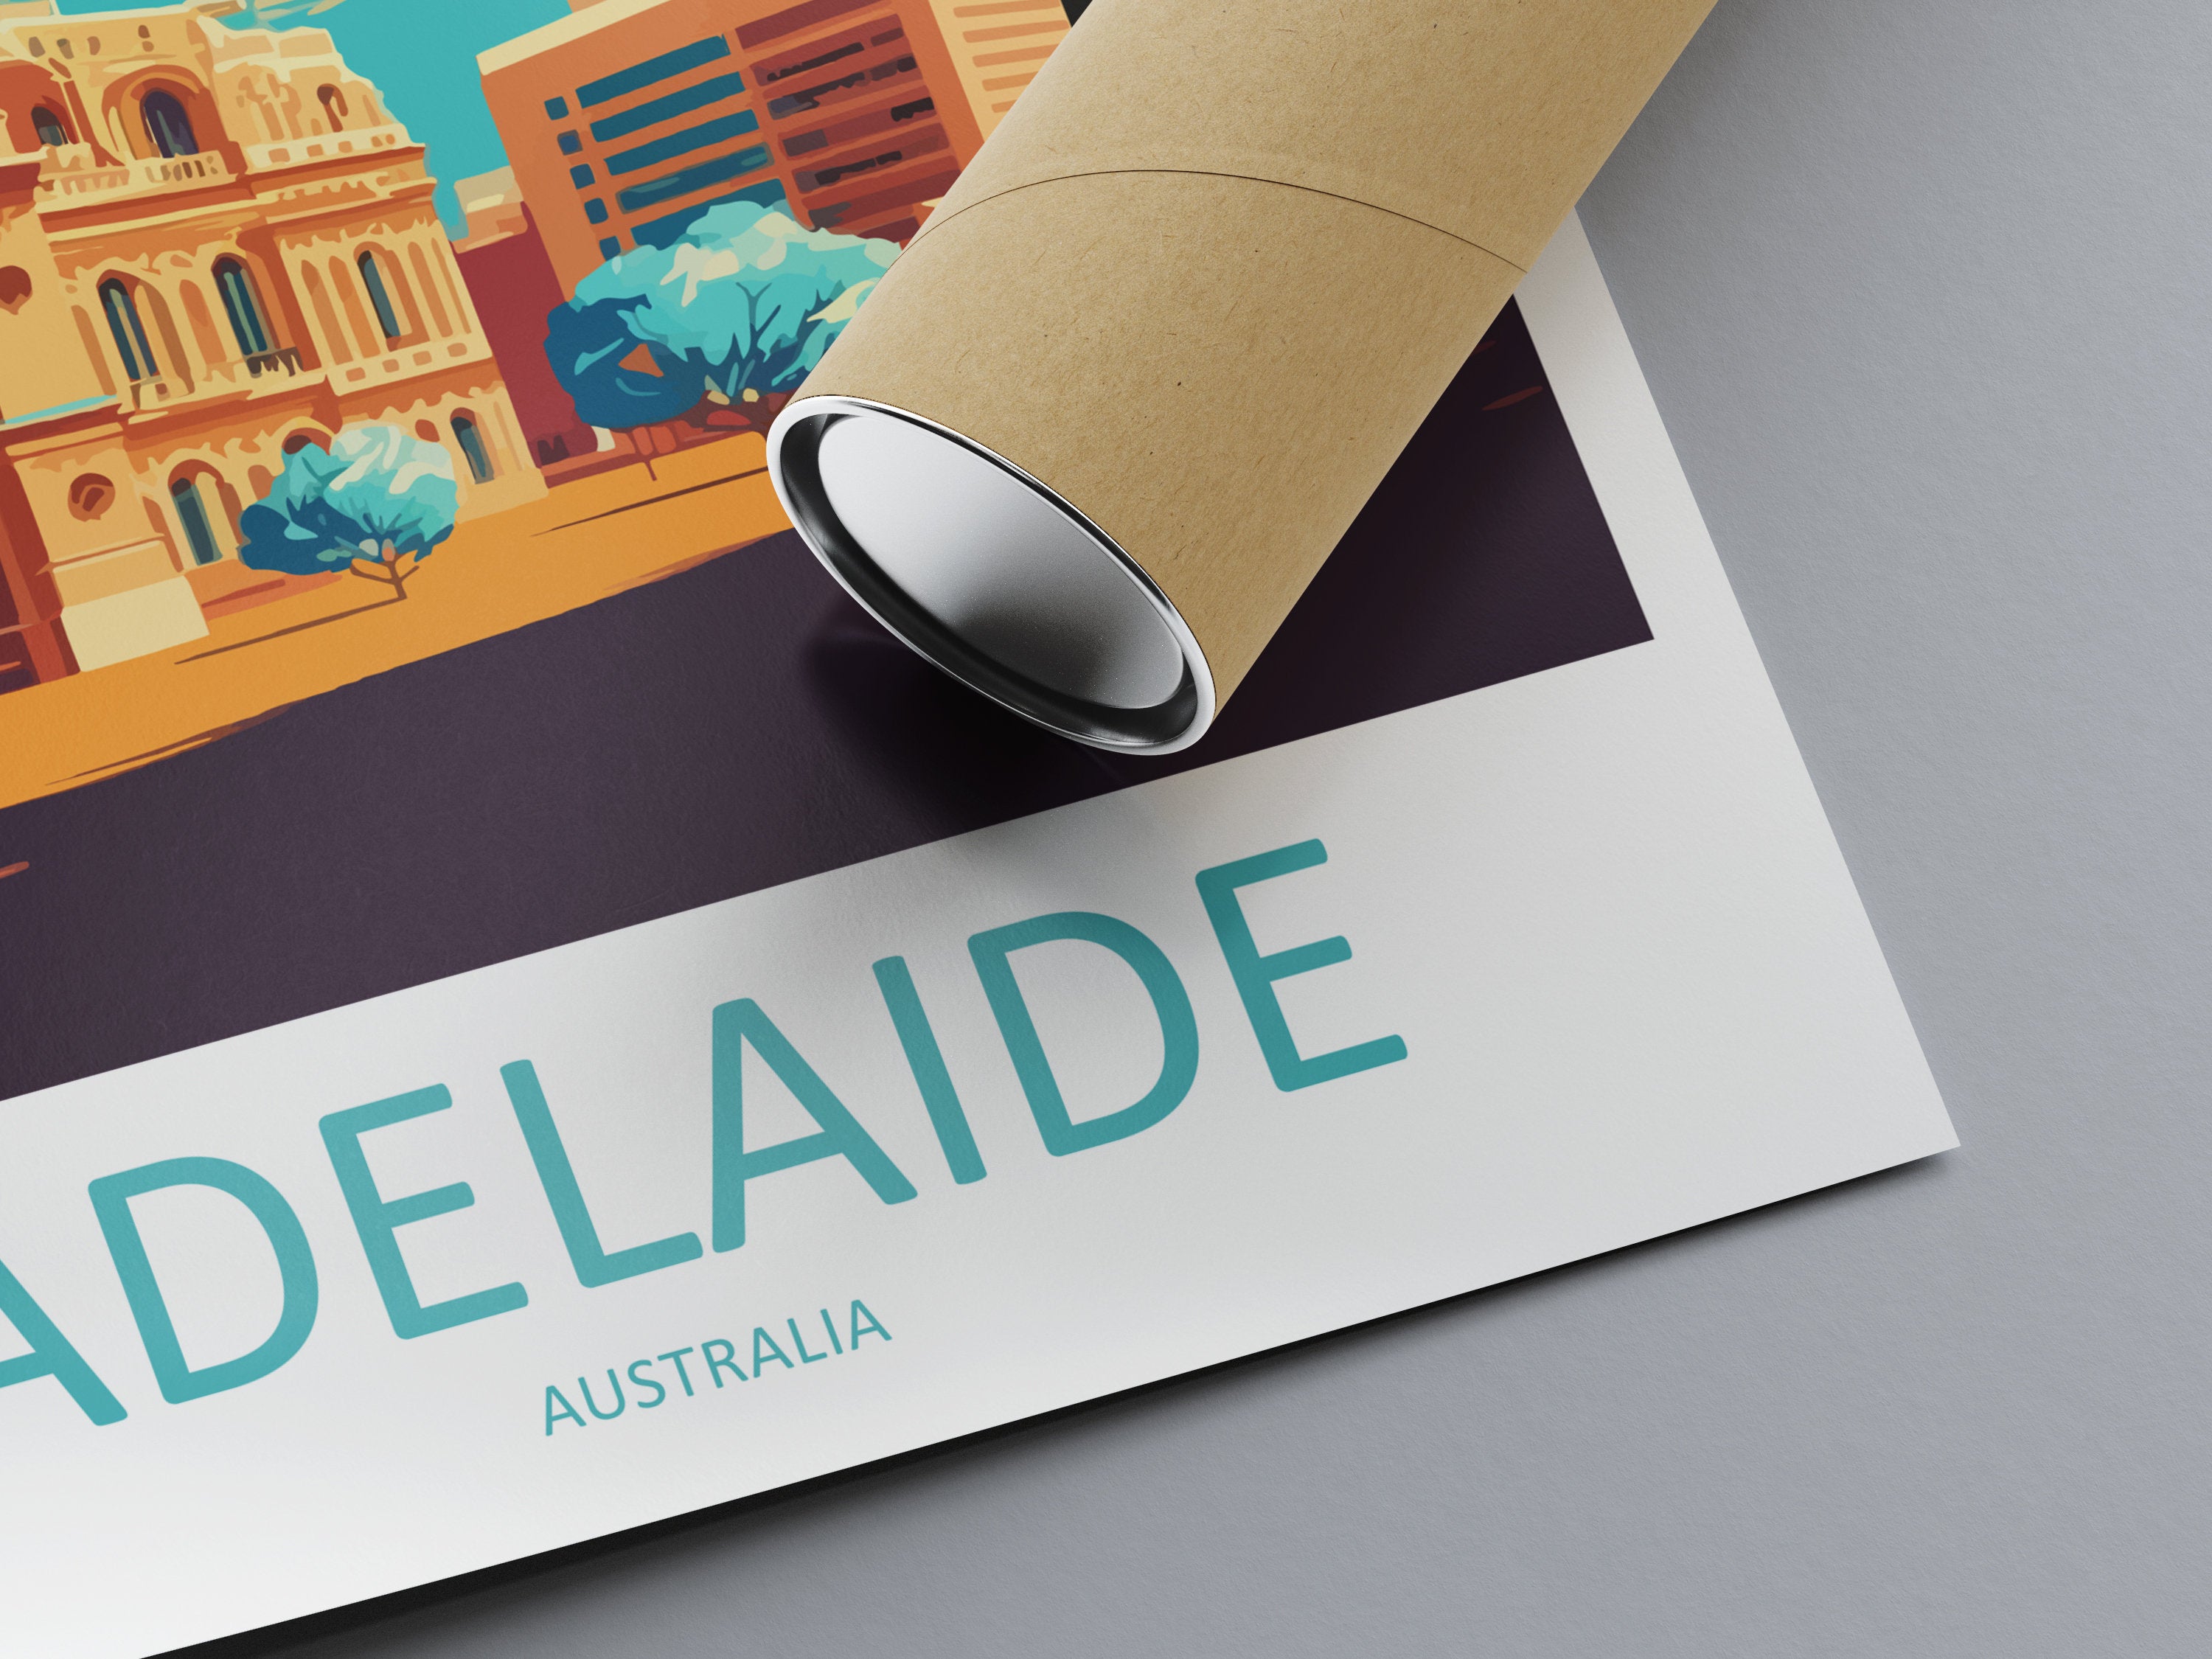 Adelaide Travel Print Wall Art Adelaide Wall Hanging Home Décor Adelaide Gift Art Lovers Wall Art Australia Travel Print Adelaide Travel Art